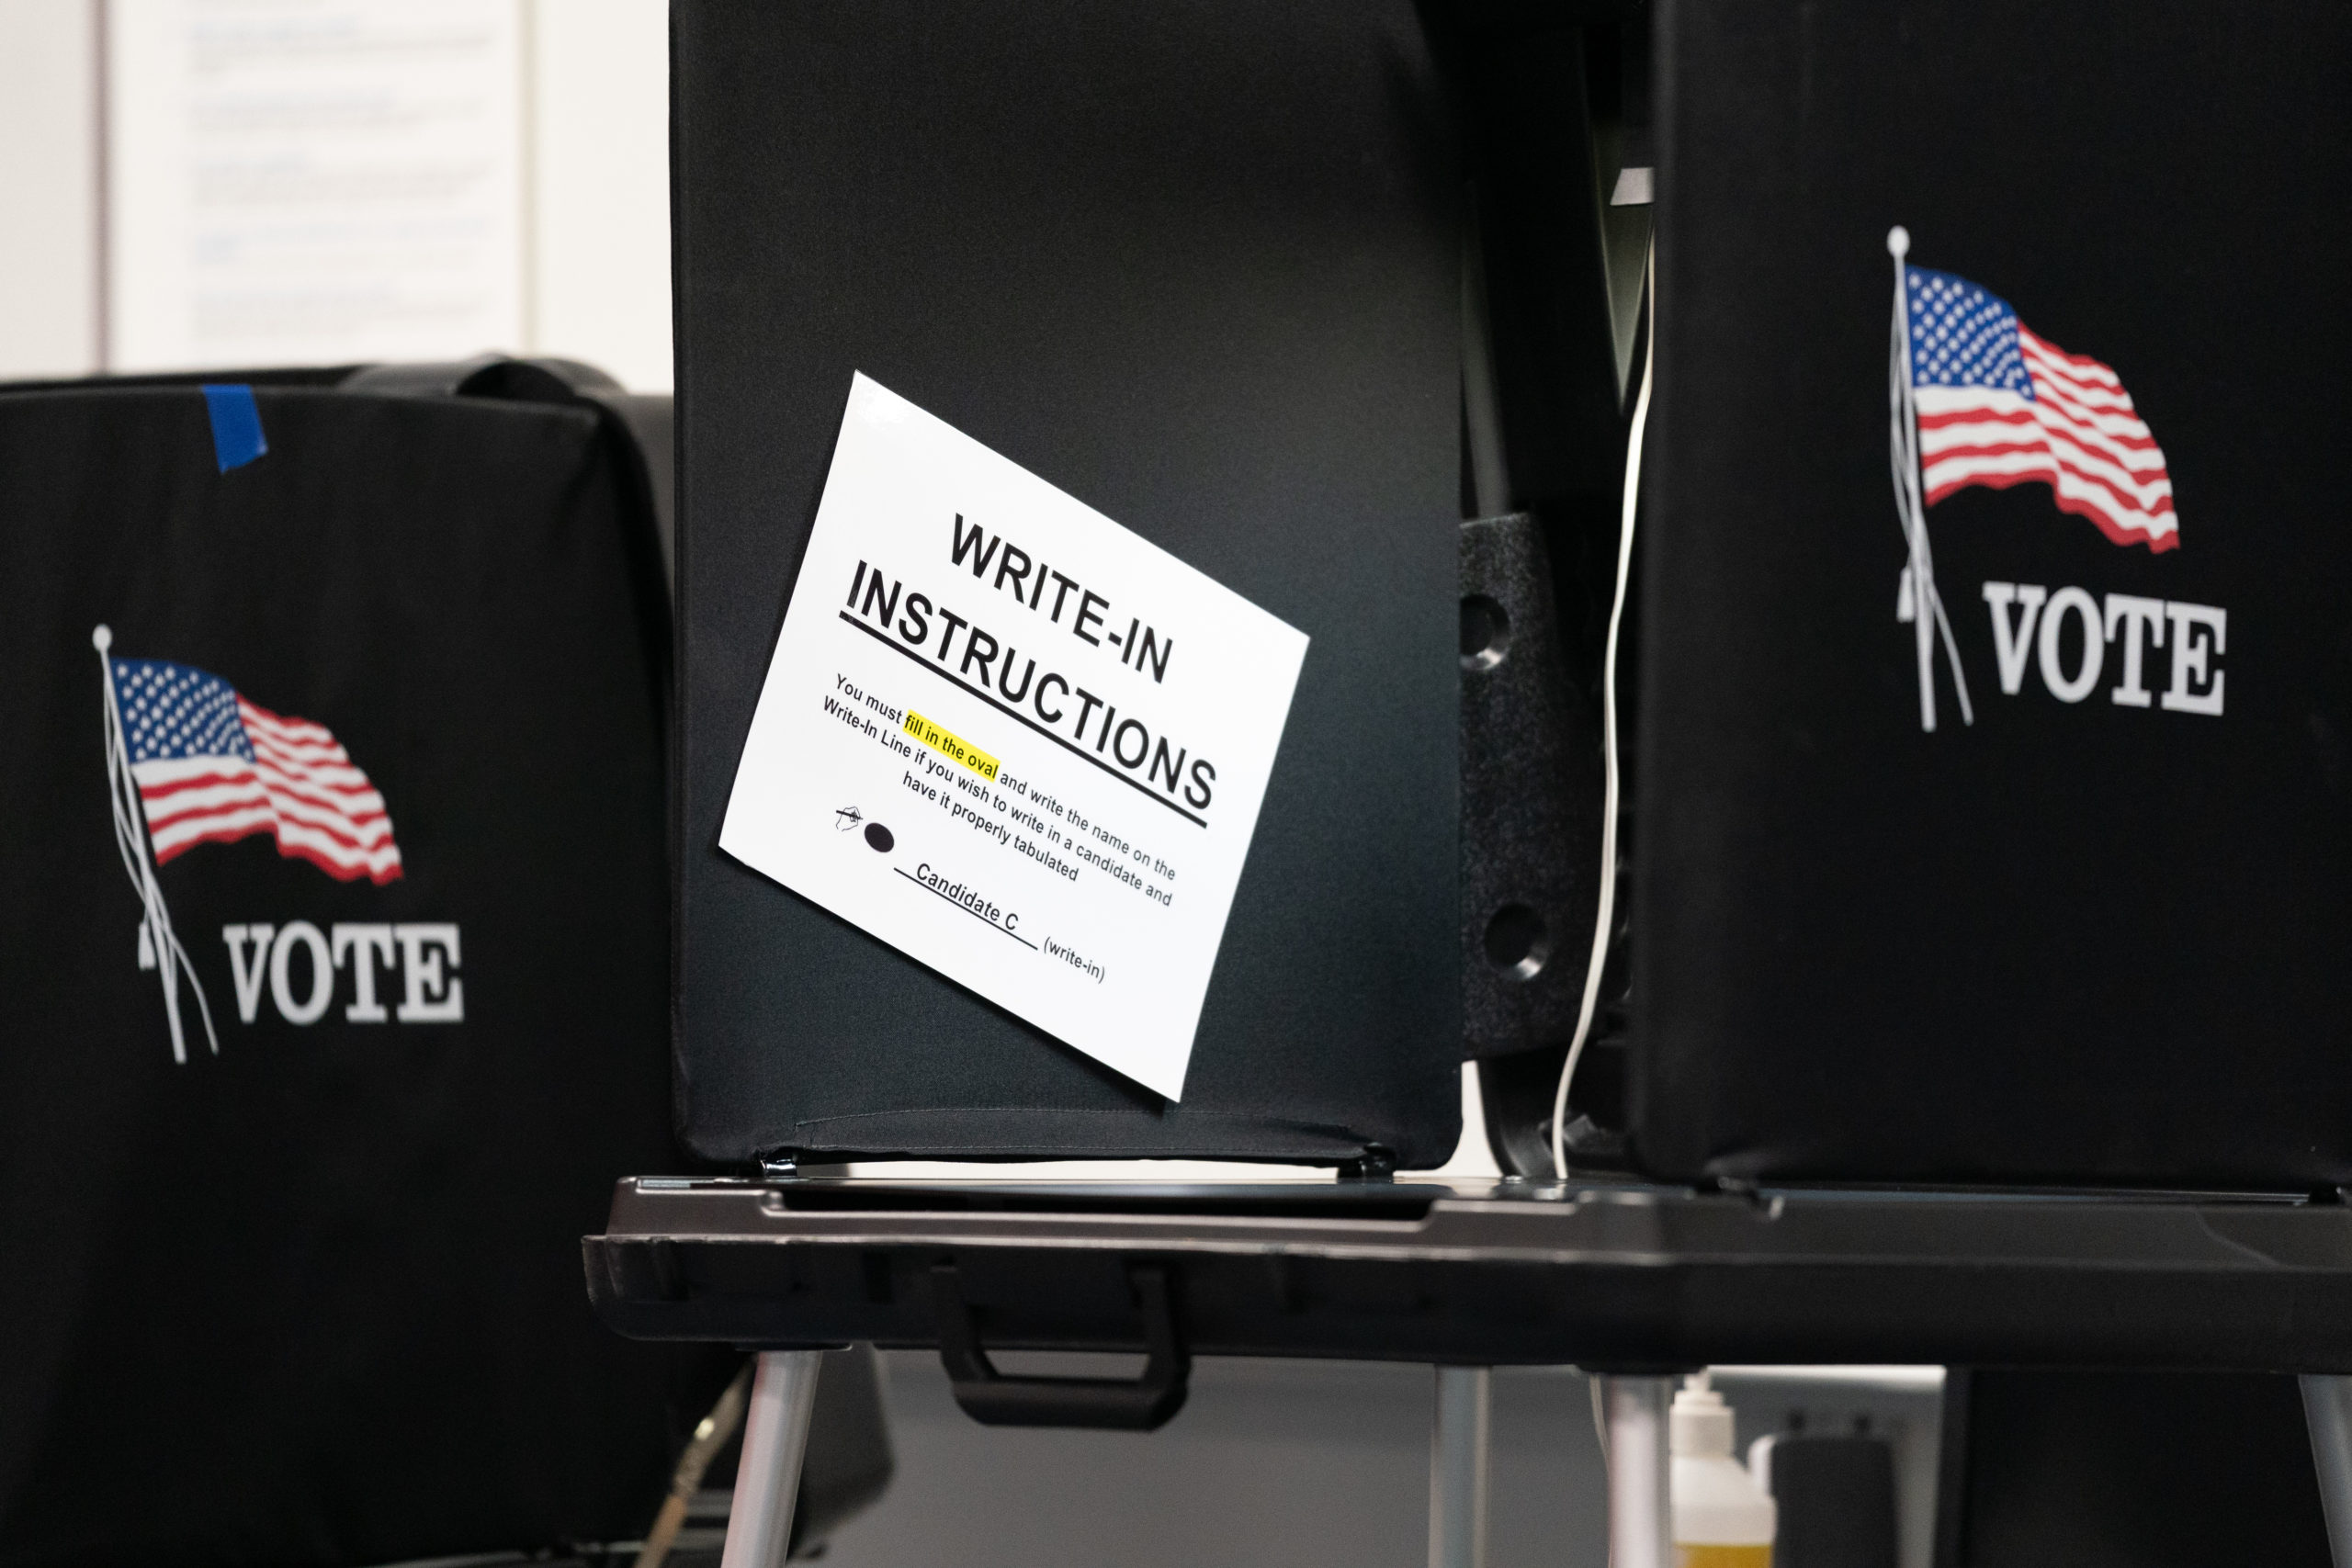 A voting booth at a polling location on November 8, 2022 in Clemmons, North Carolina, United States. After months of candidates campaigning, Americans are voting in the midterm elections to decide close races across the nation. (Photo by Sean Rayford/Getty Images)